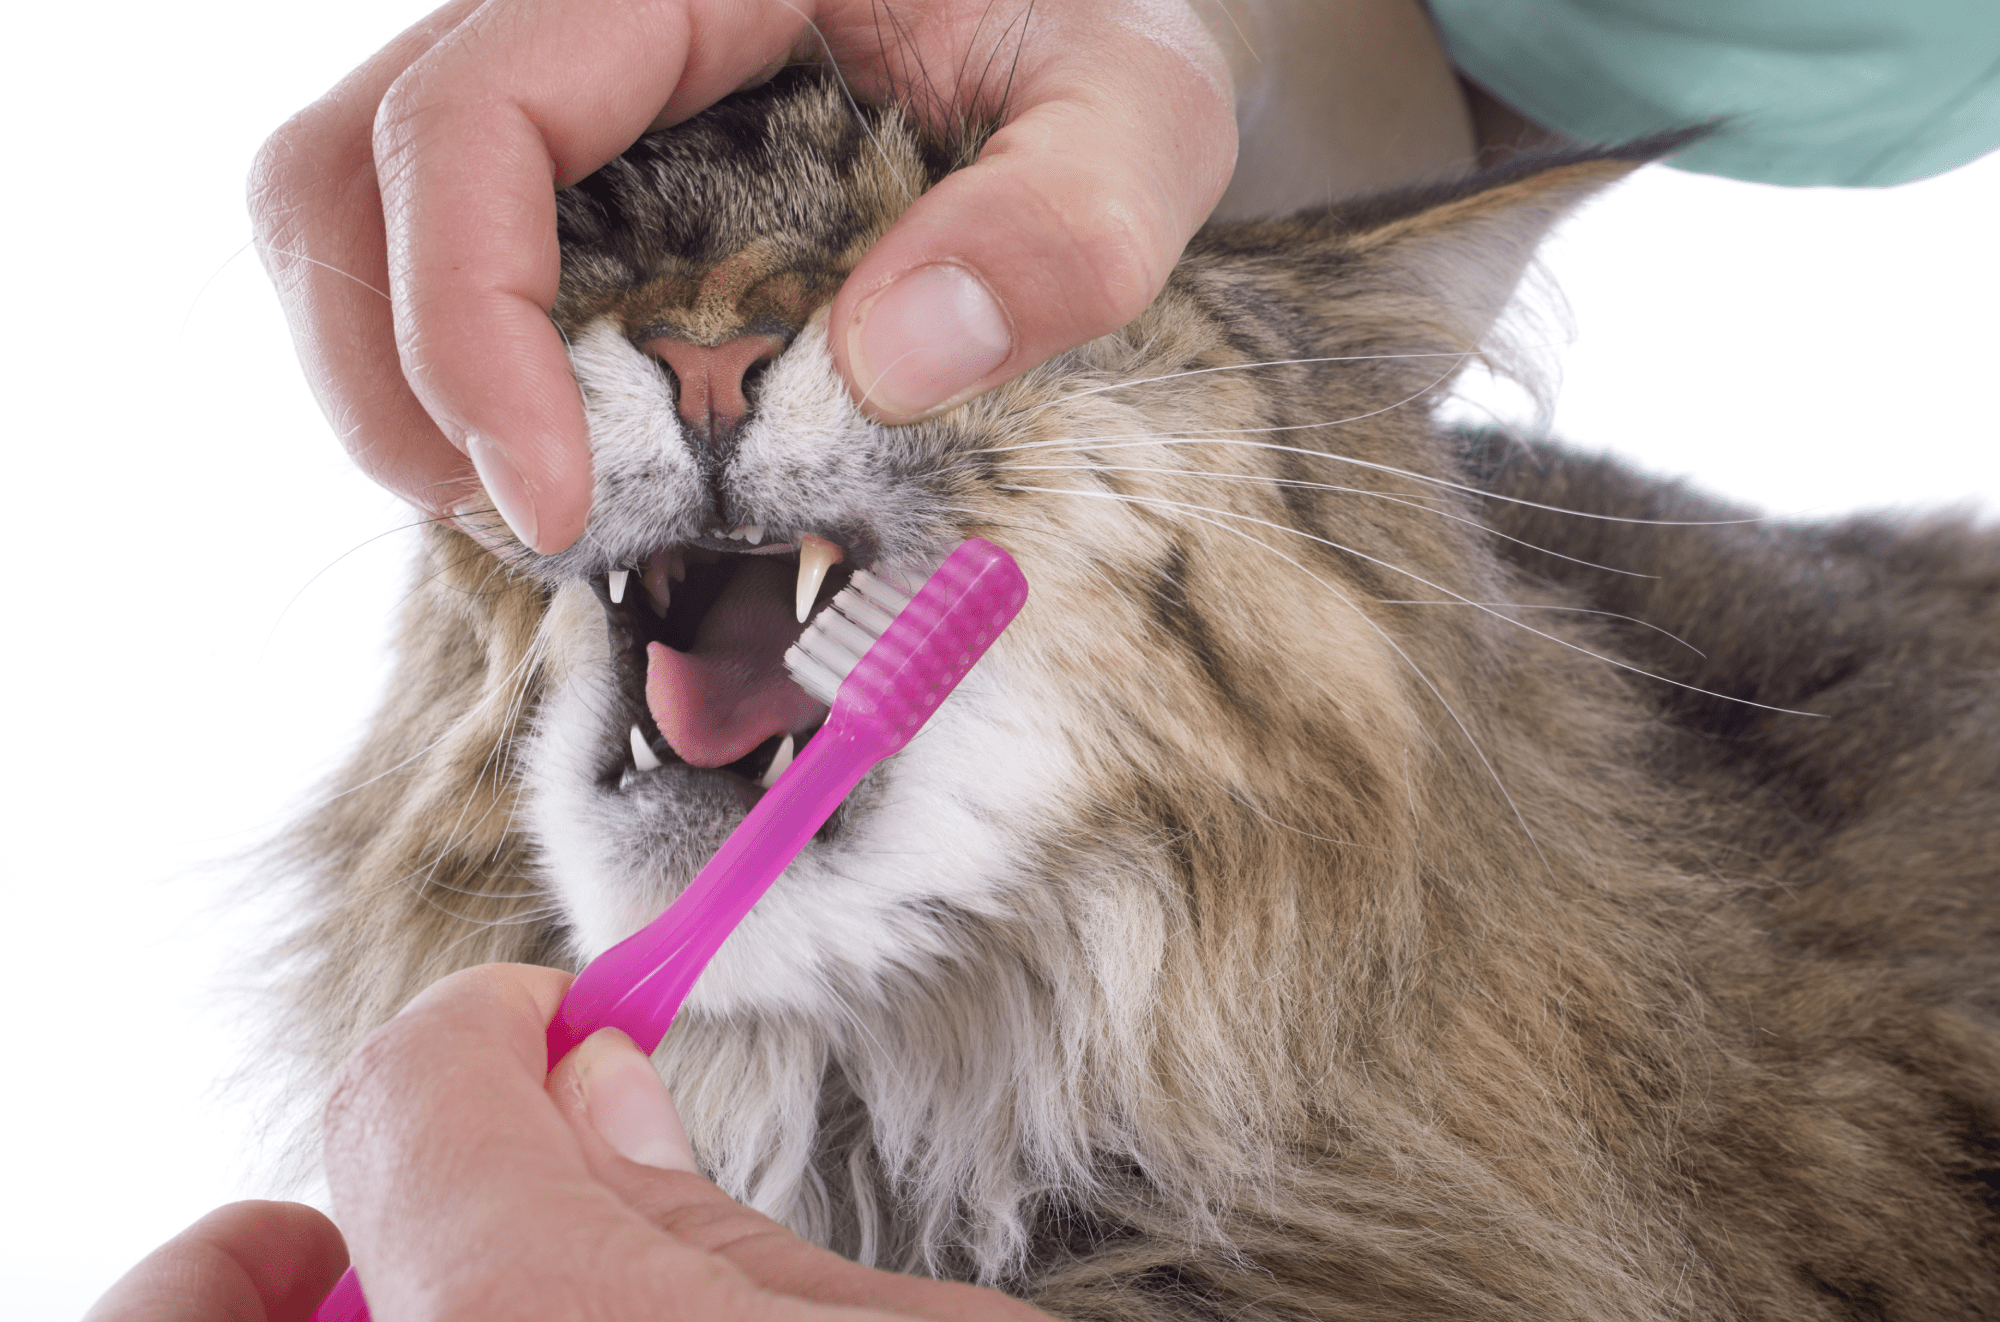 A photo of a cat having their teeth brushed